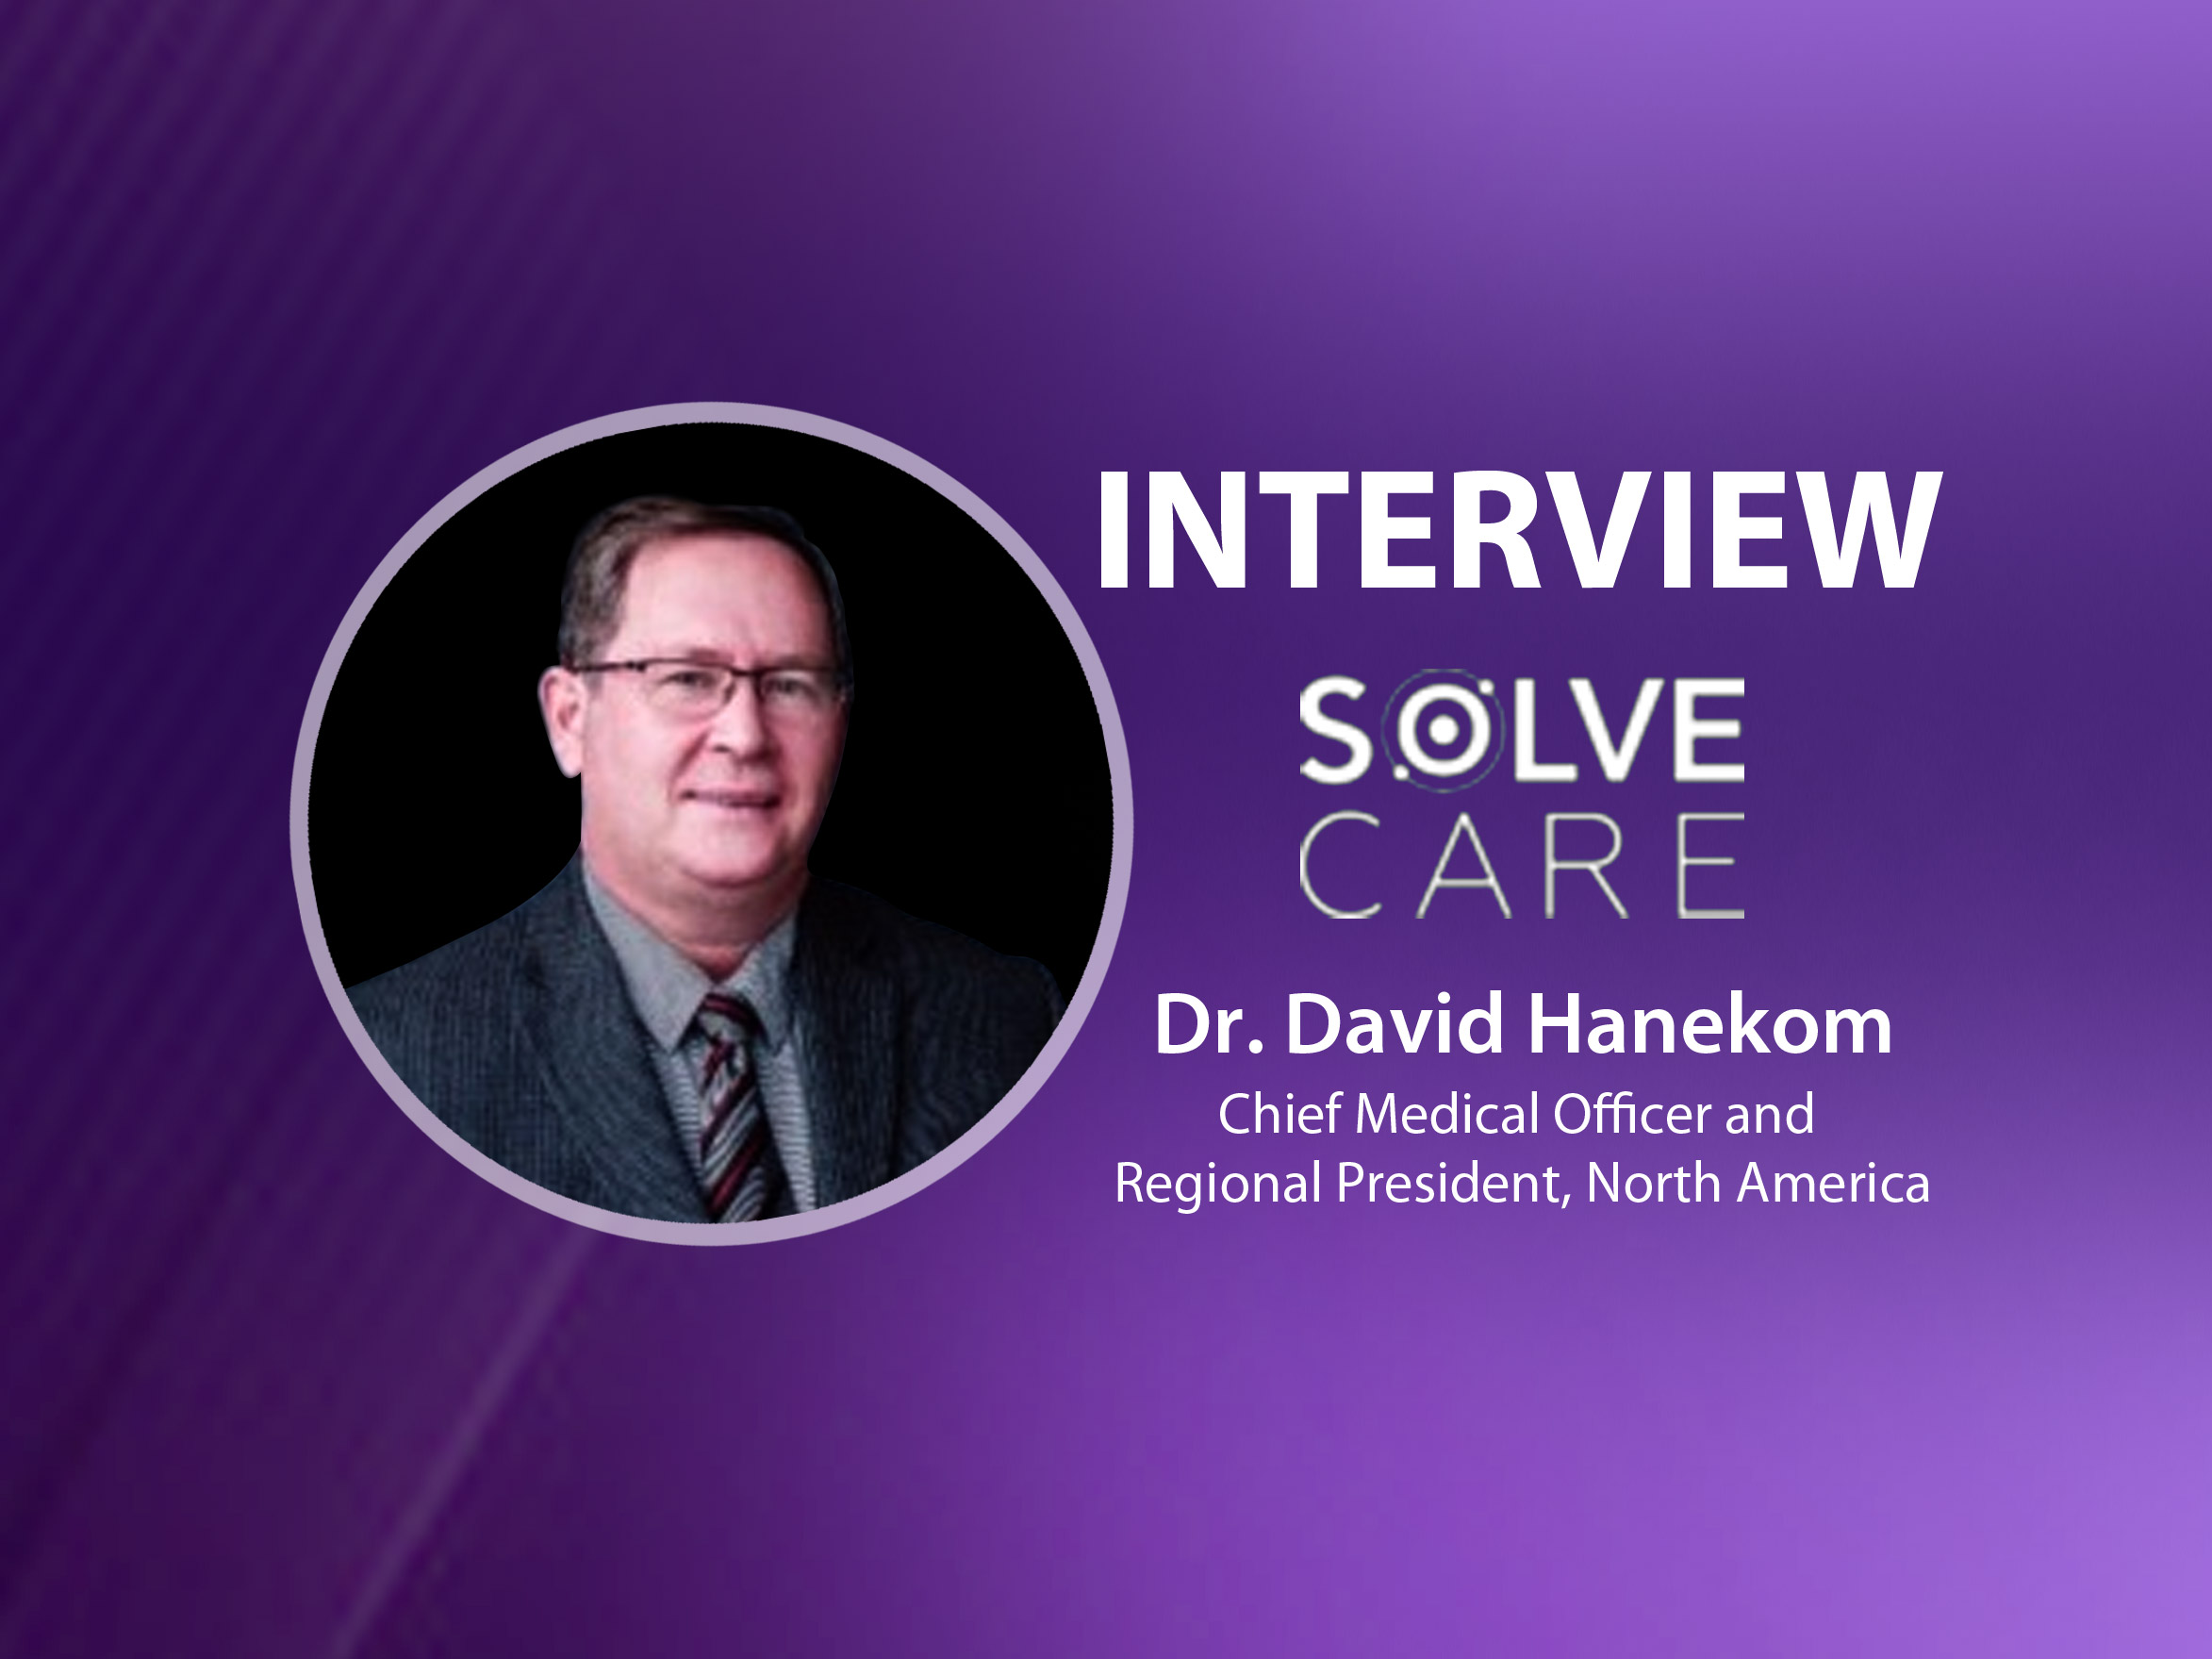 Global Fintech Interview with Dr. David Hanekom, CMO at Solve.care